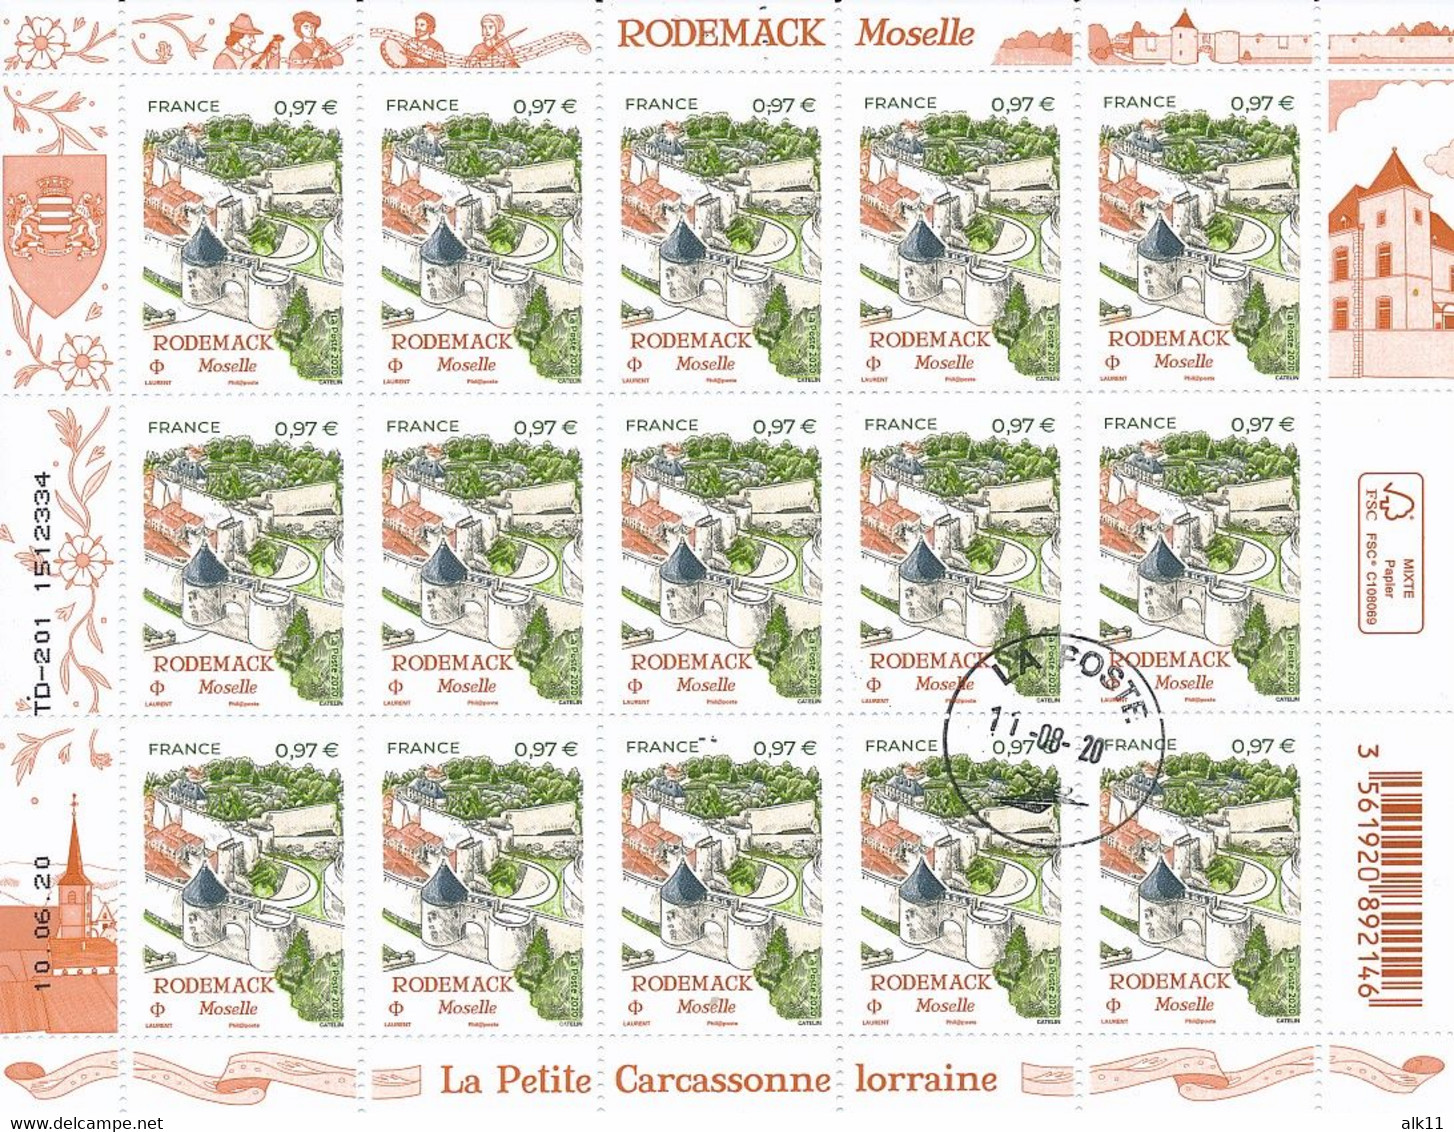 France 2020 - 5407 Rodemack Moselle - Feuillet 15 Timbres - Oblitéré Cachet Rond - Used Stamps